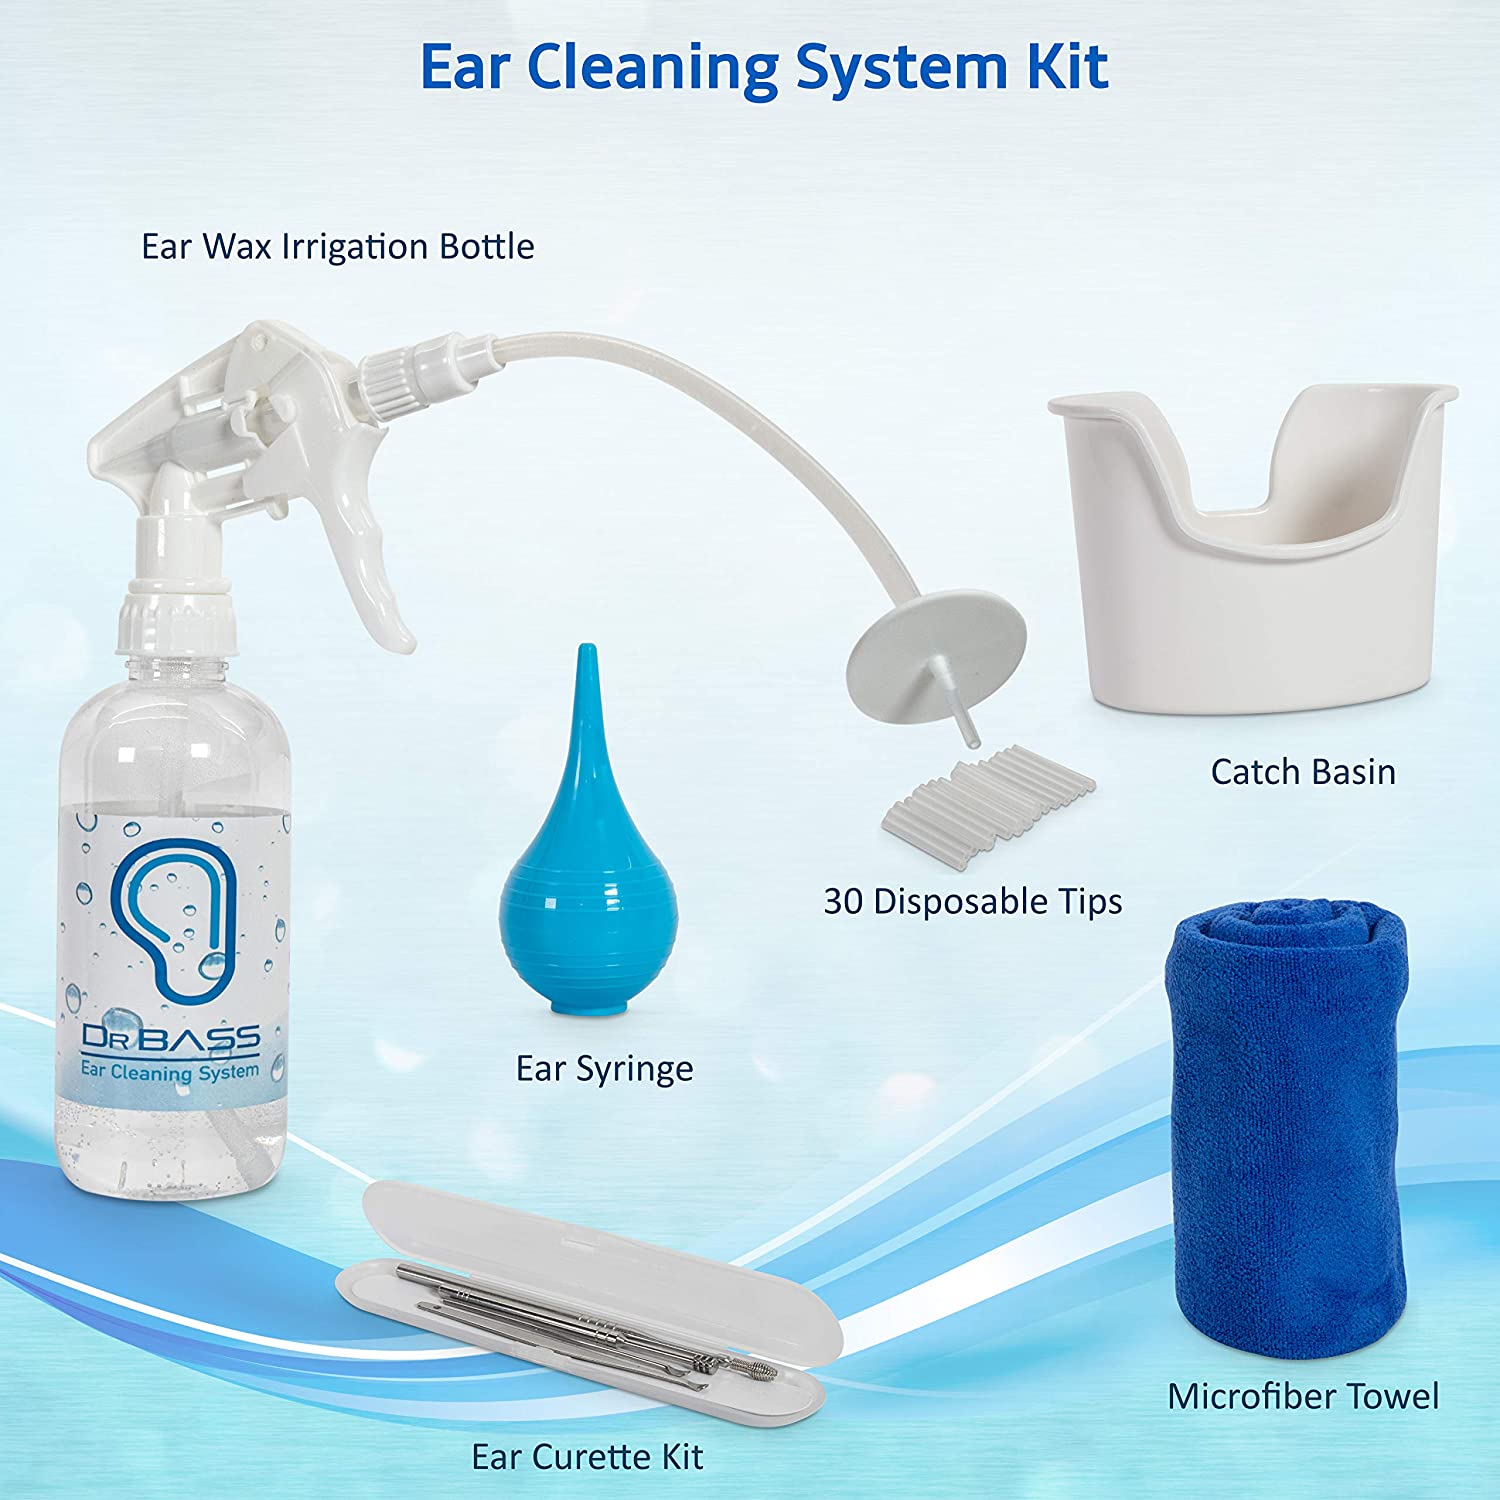 Ear Wax Removal Tool by Tilcare - Ear Irrigation Flushing System for Adults & Kids - Perfect Ear Cleaning Kit - Includes Basin, Towel and 25 Disposable Tips - e4cents